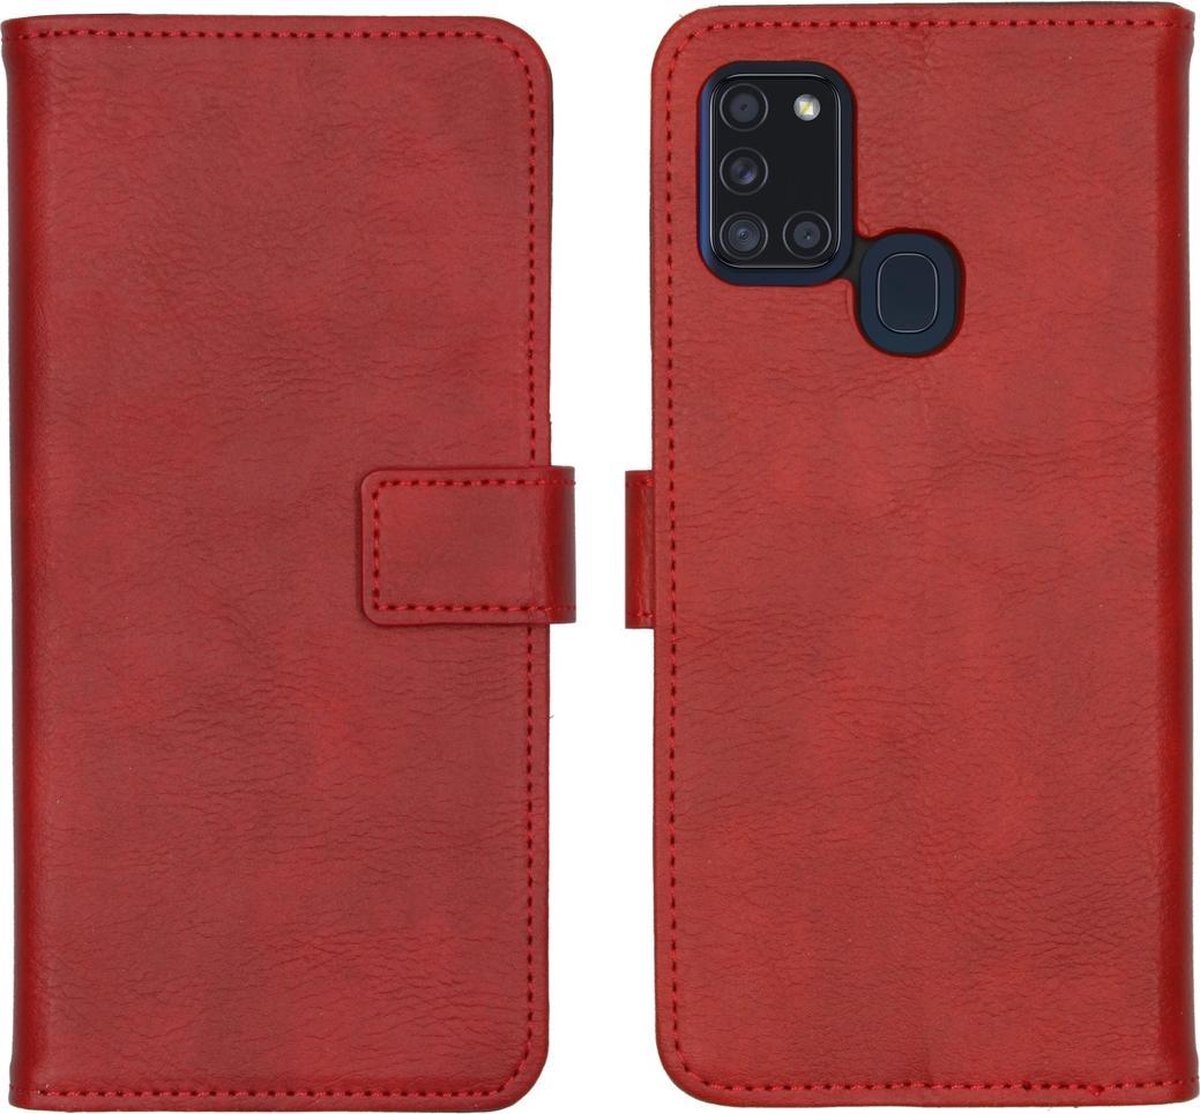 imoshion Luxe Booktype Samsung Galaxy A21s hoesje - Rood